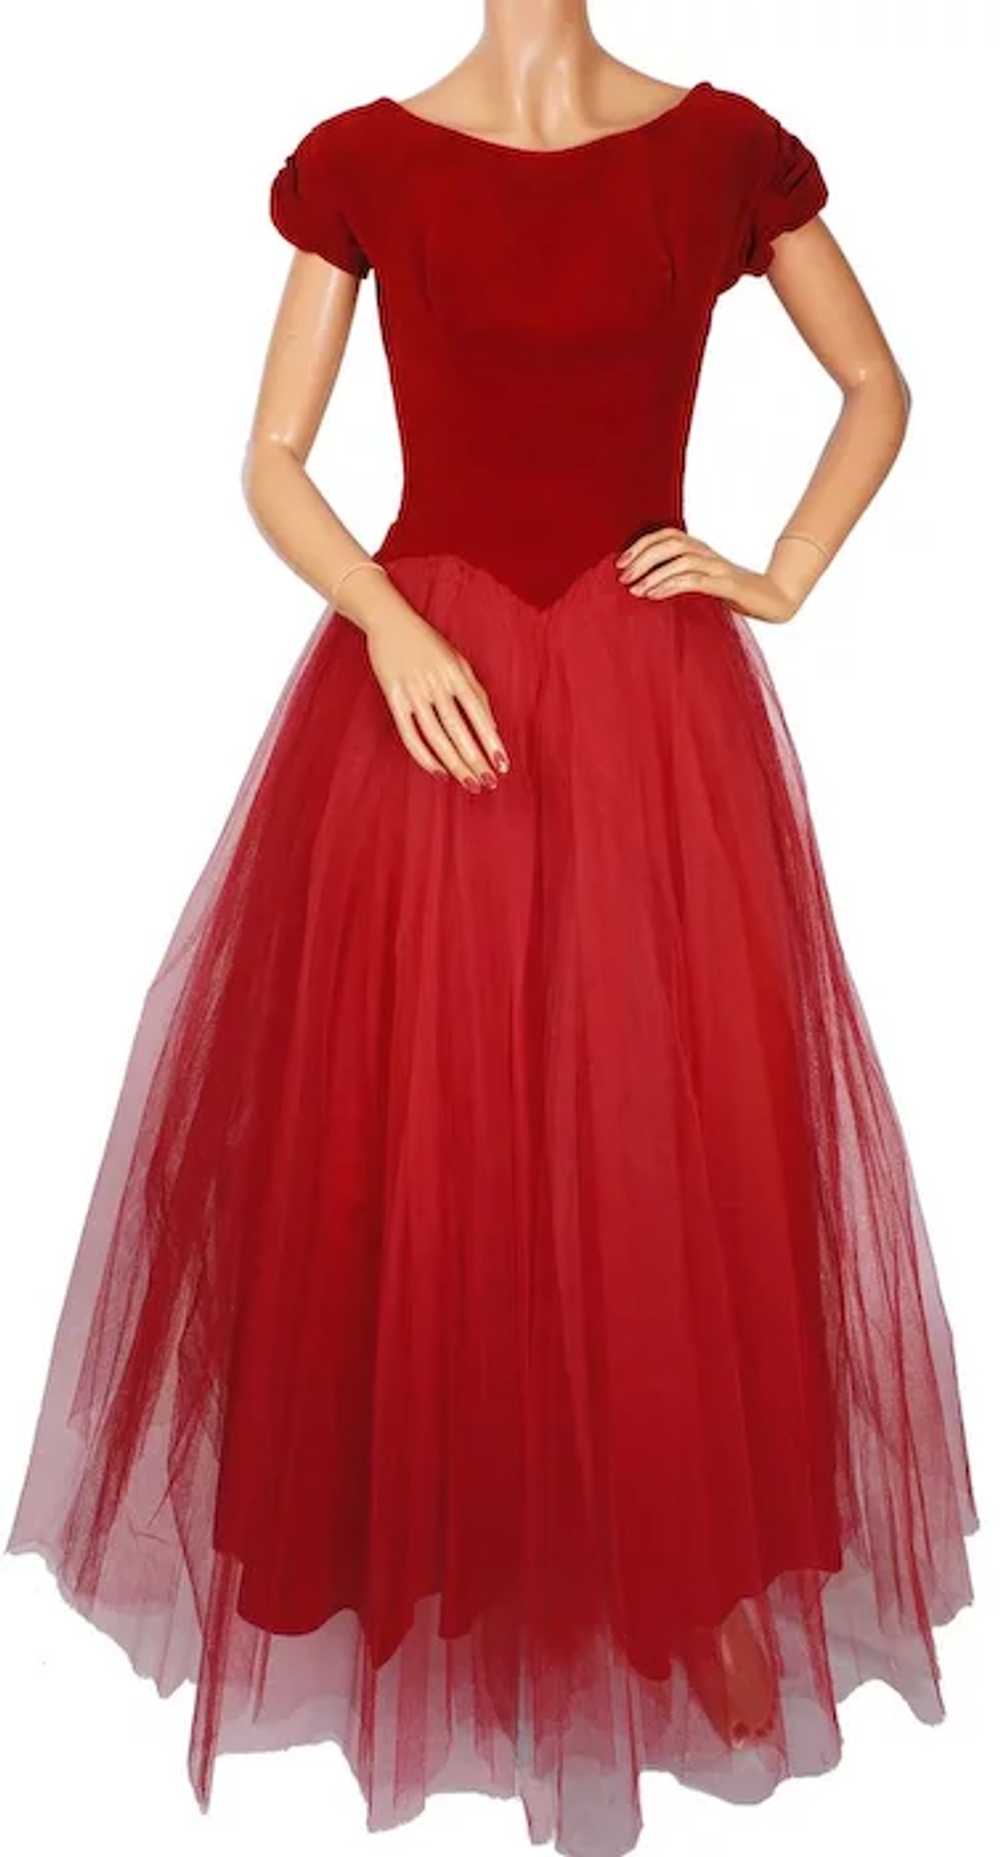 Vintage 1950s Red Tulle Ball Gown Prom Dress Size… - image 2